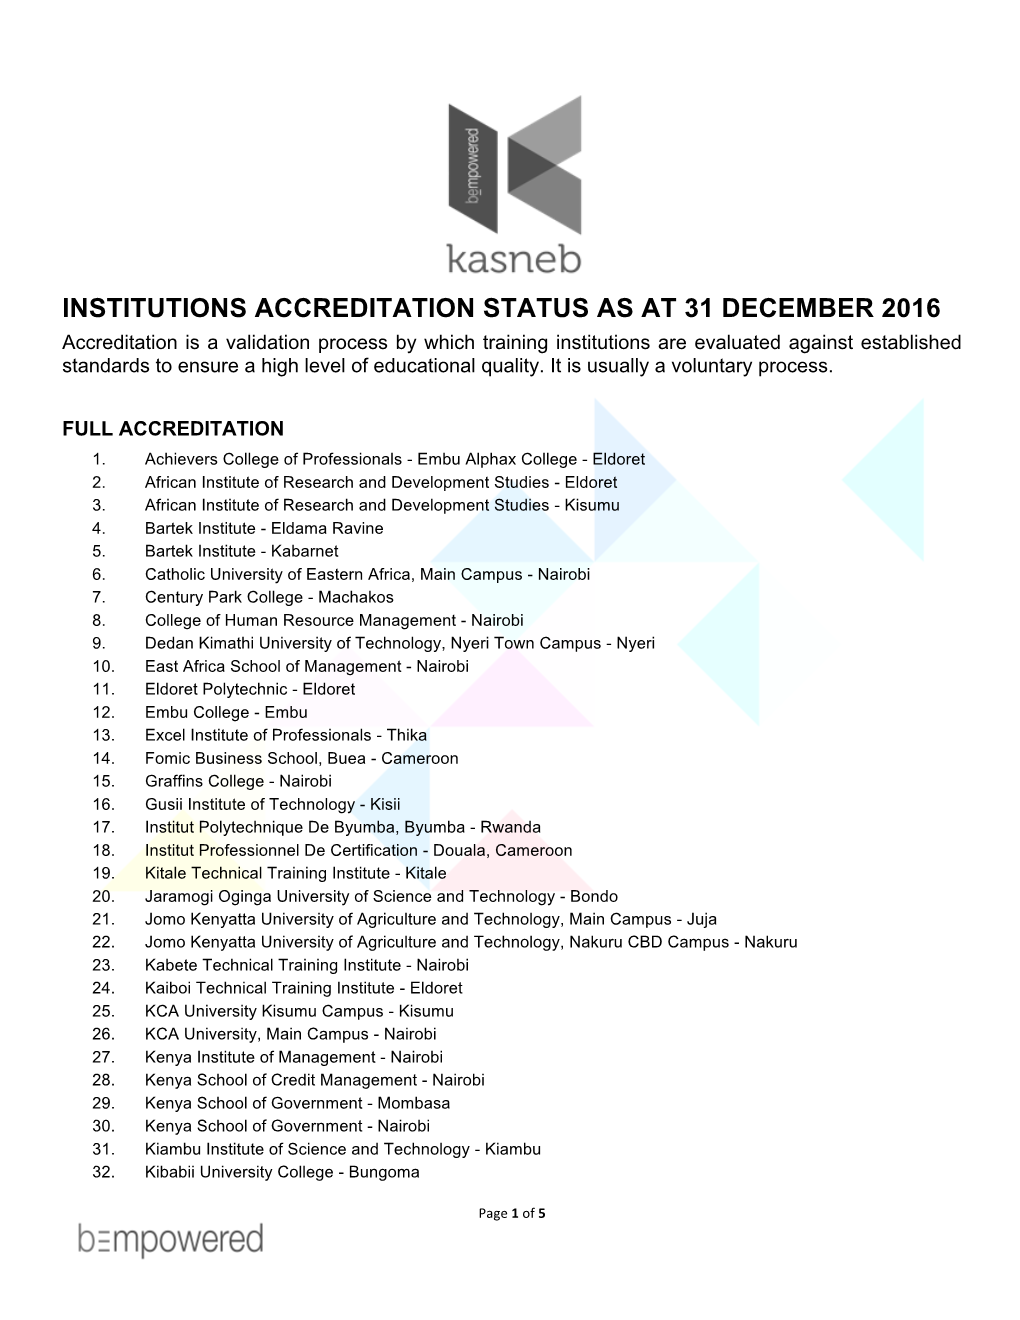 Institutions Accreditation Status As at 31 December 2016